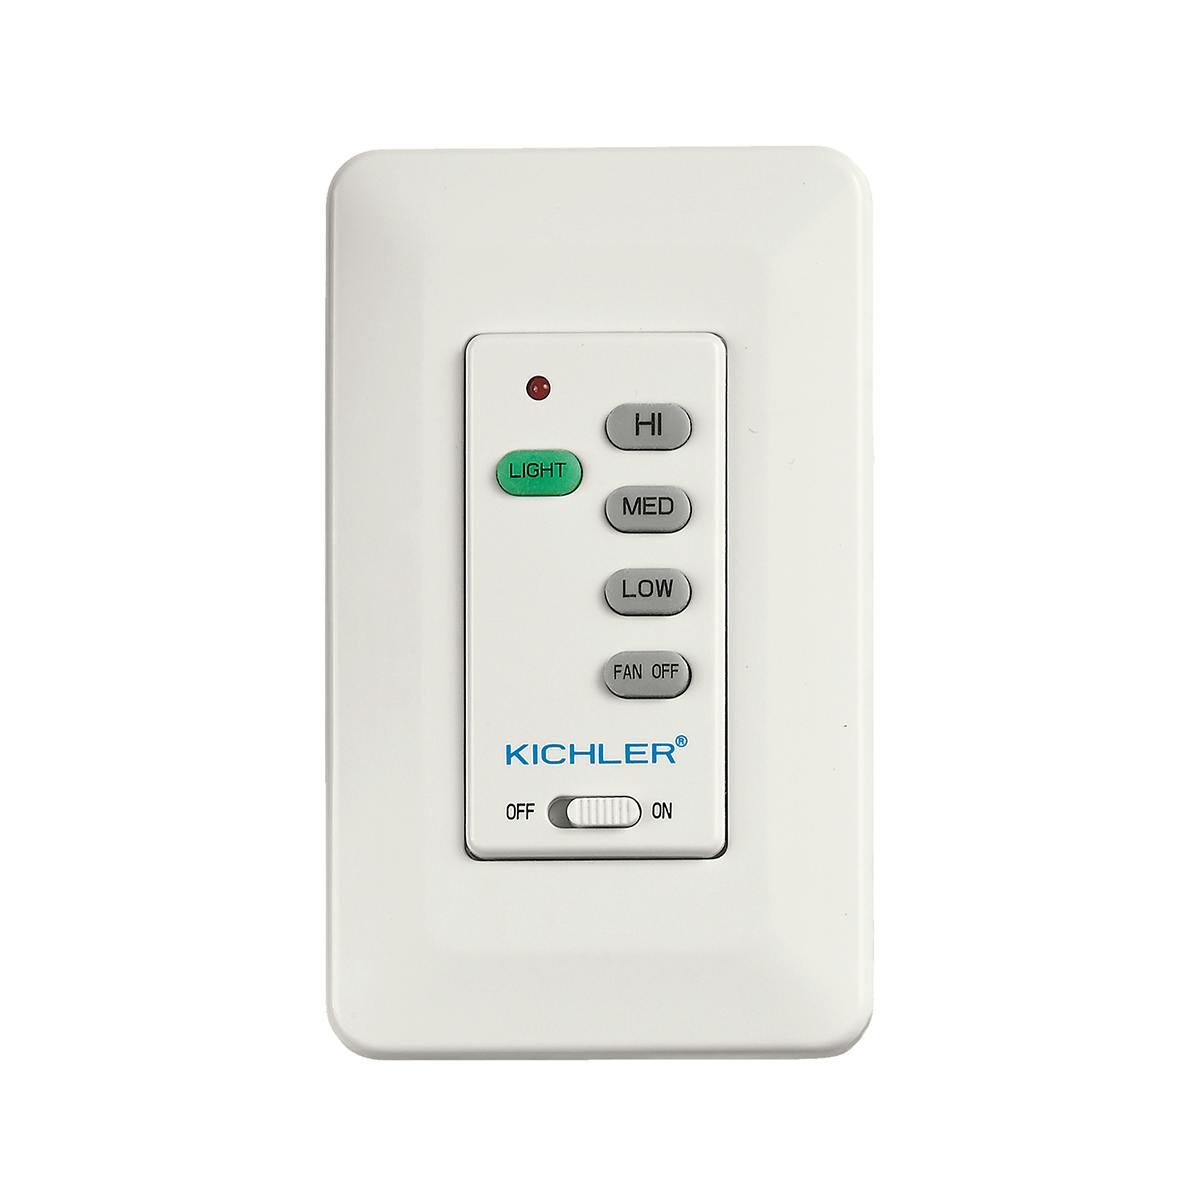 65K Wall Transmitter Limited Function on a white background